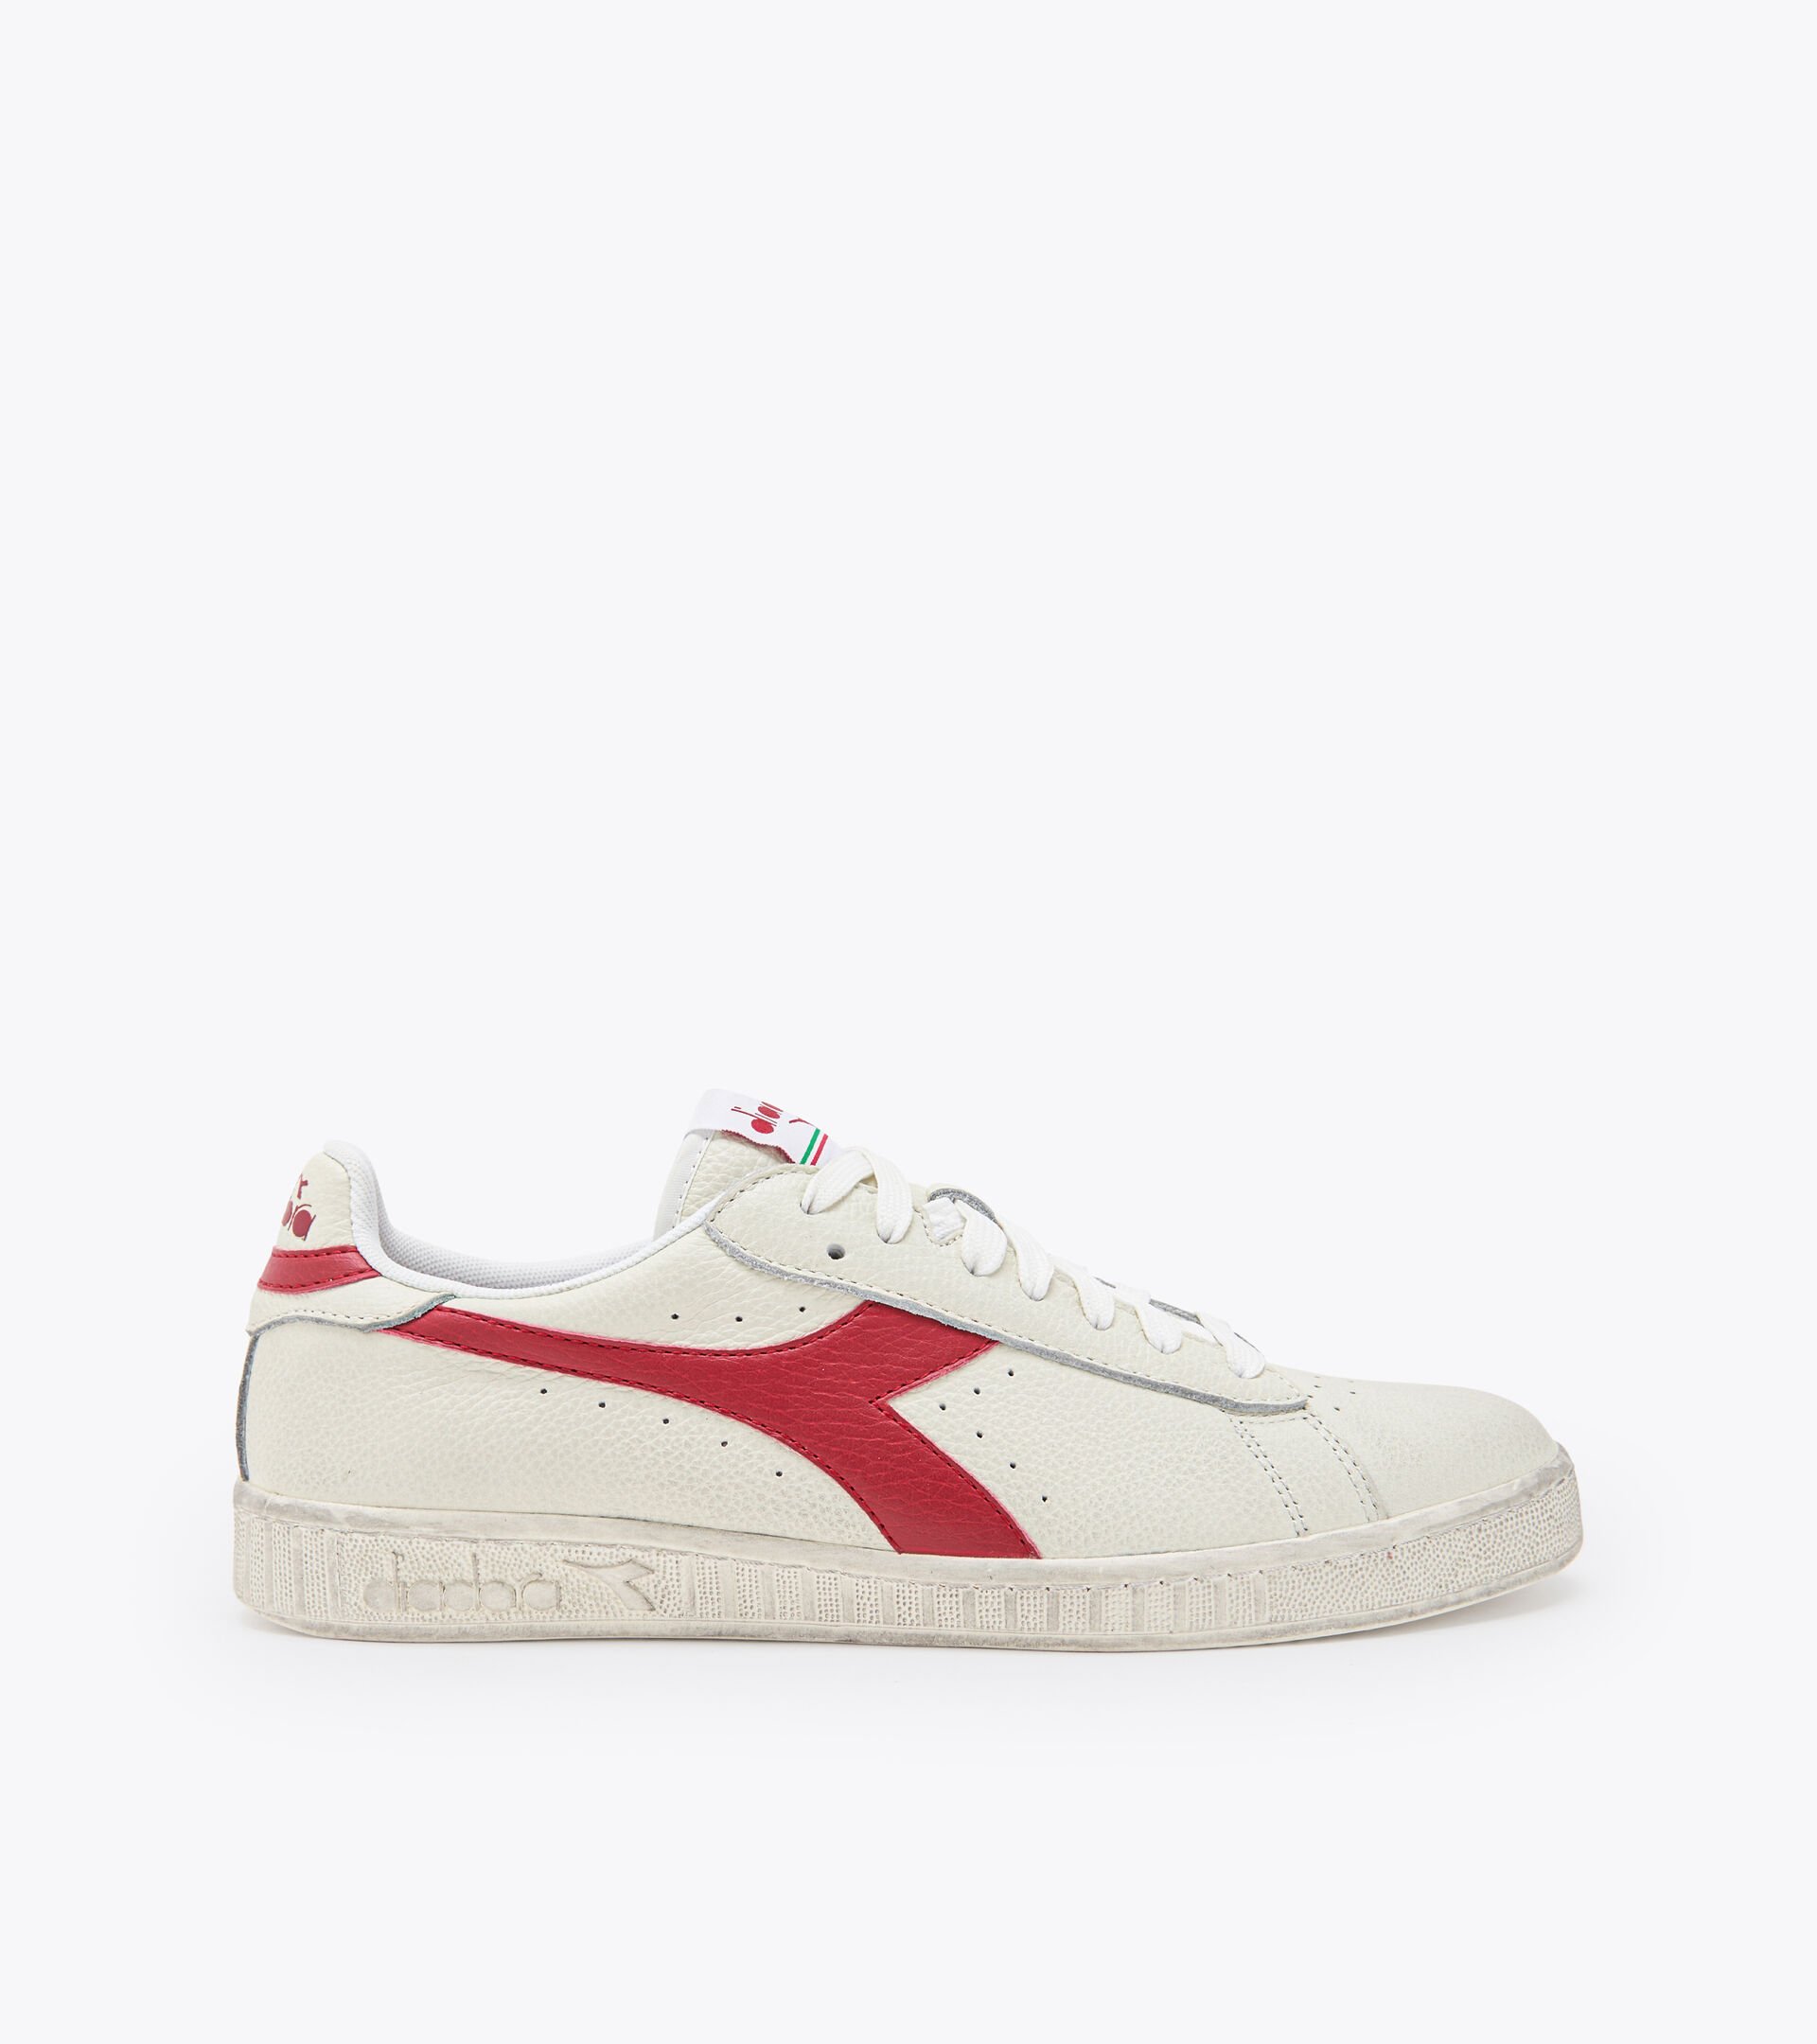 Sneaker sportiva - Gender Neutral GAME L LOW WAXED BIANCO/ROSSO PEPERONE - Diadora